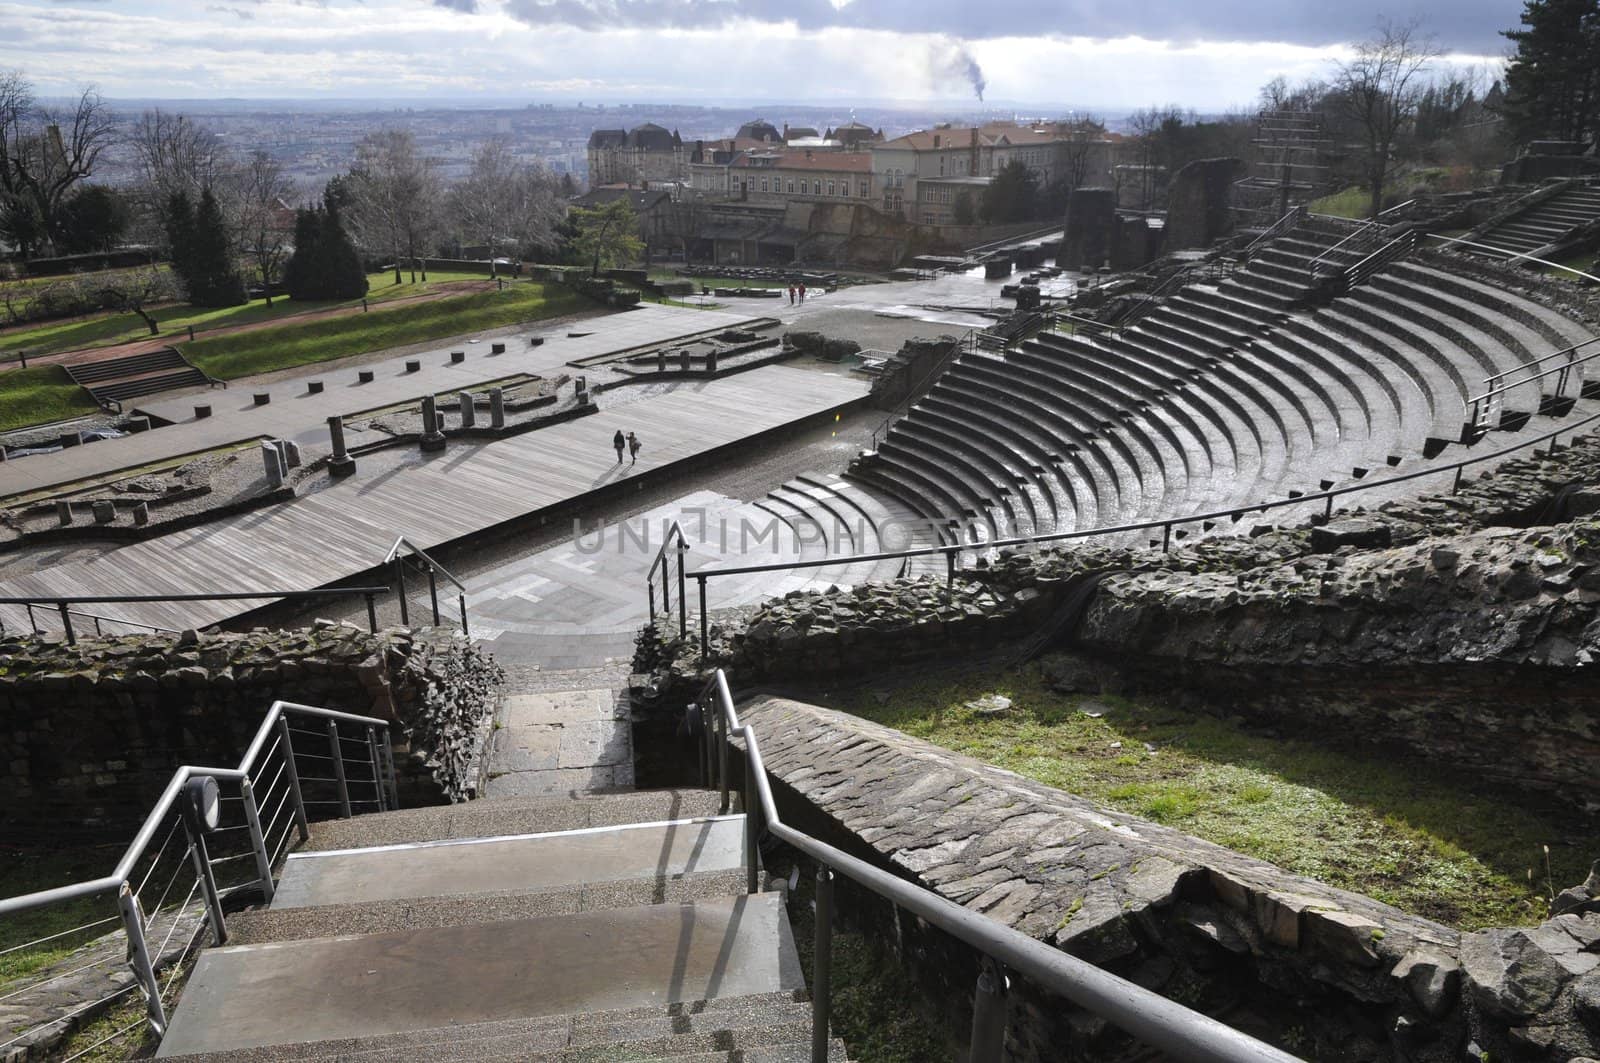 Wide view of a Roman theatre in Lyon city by shkyo30